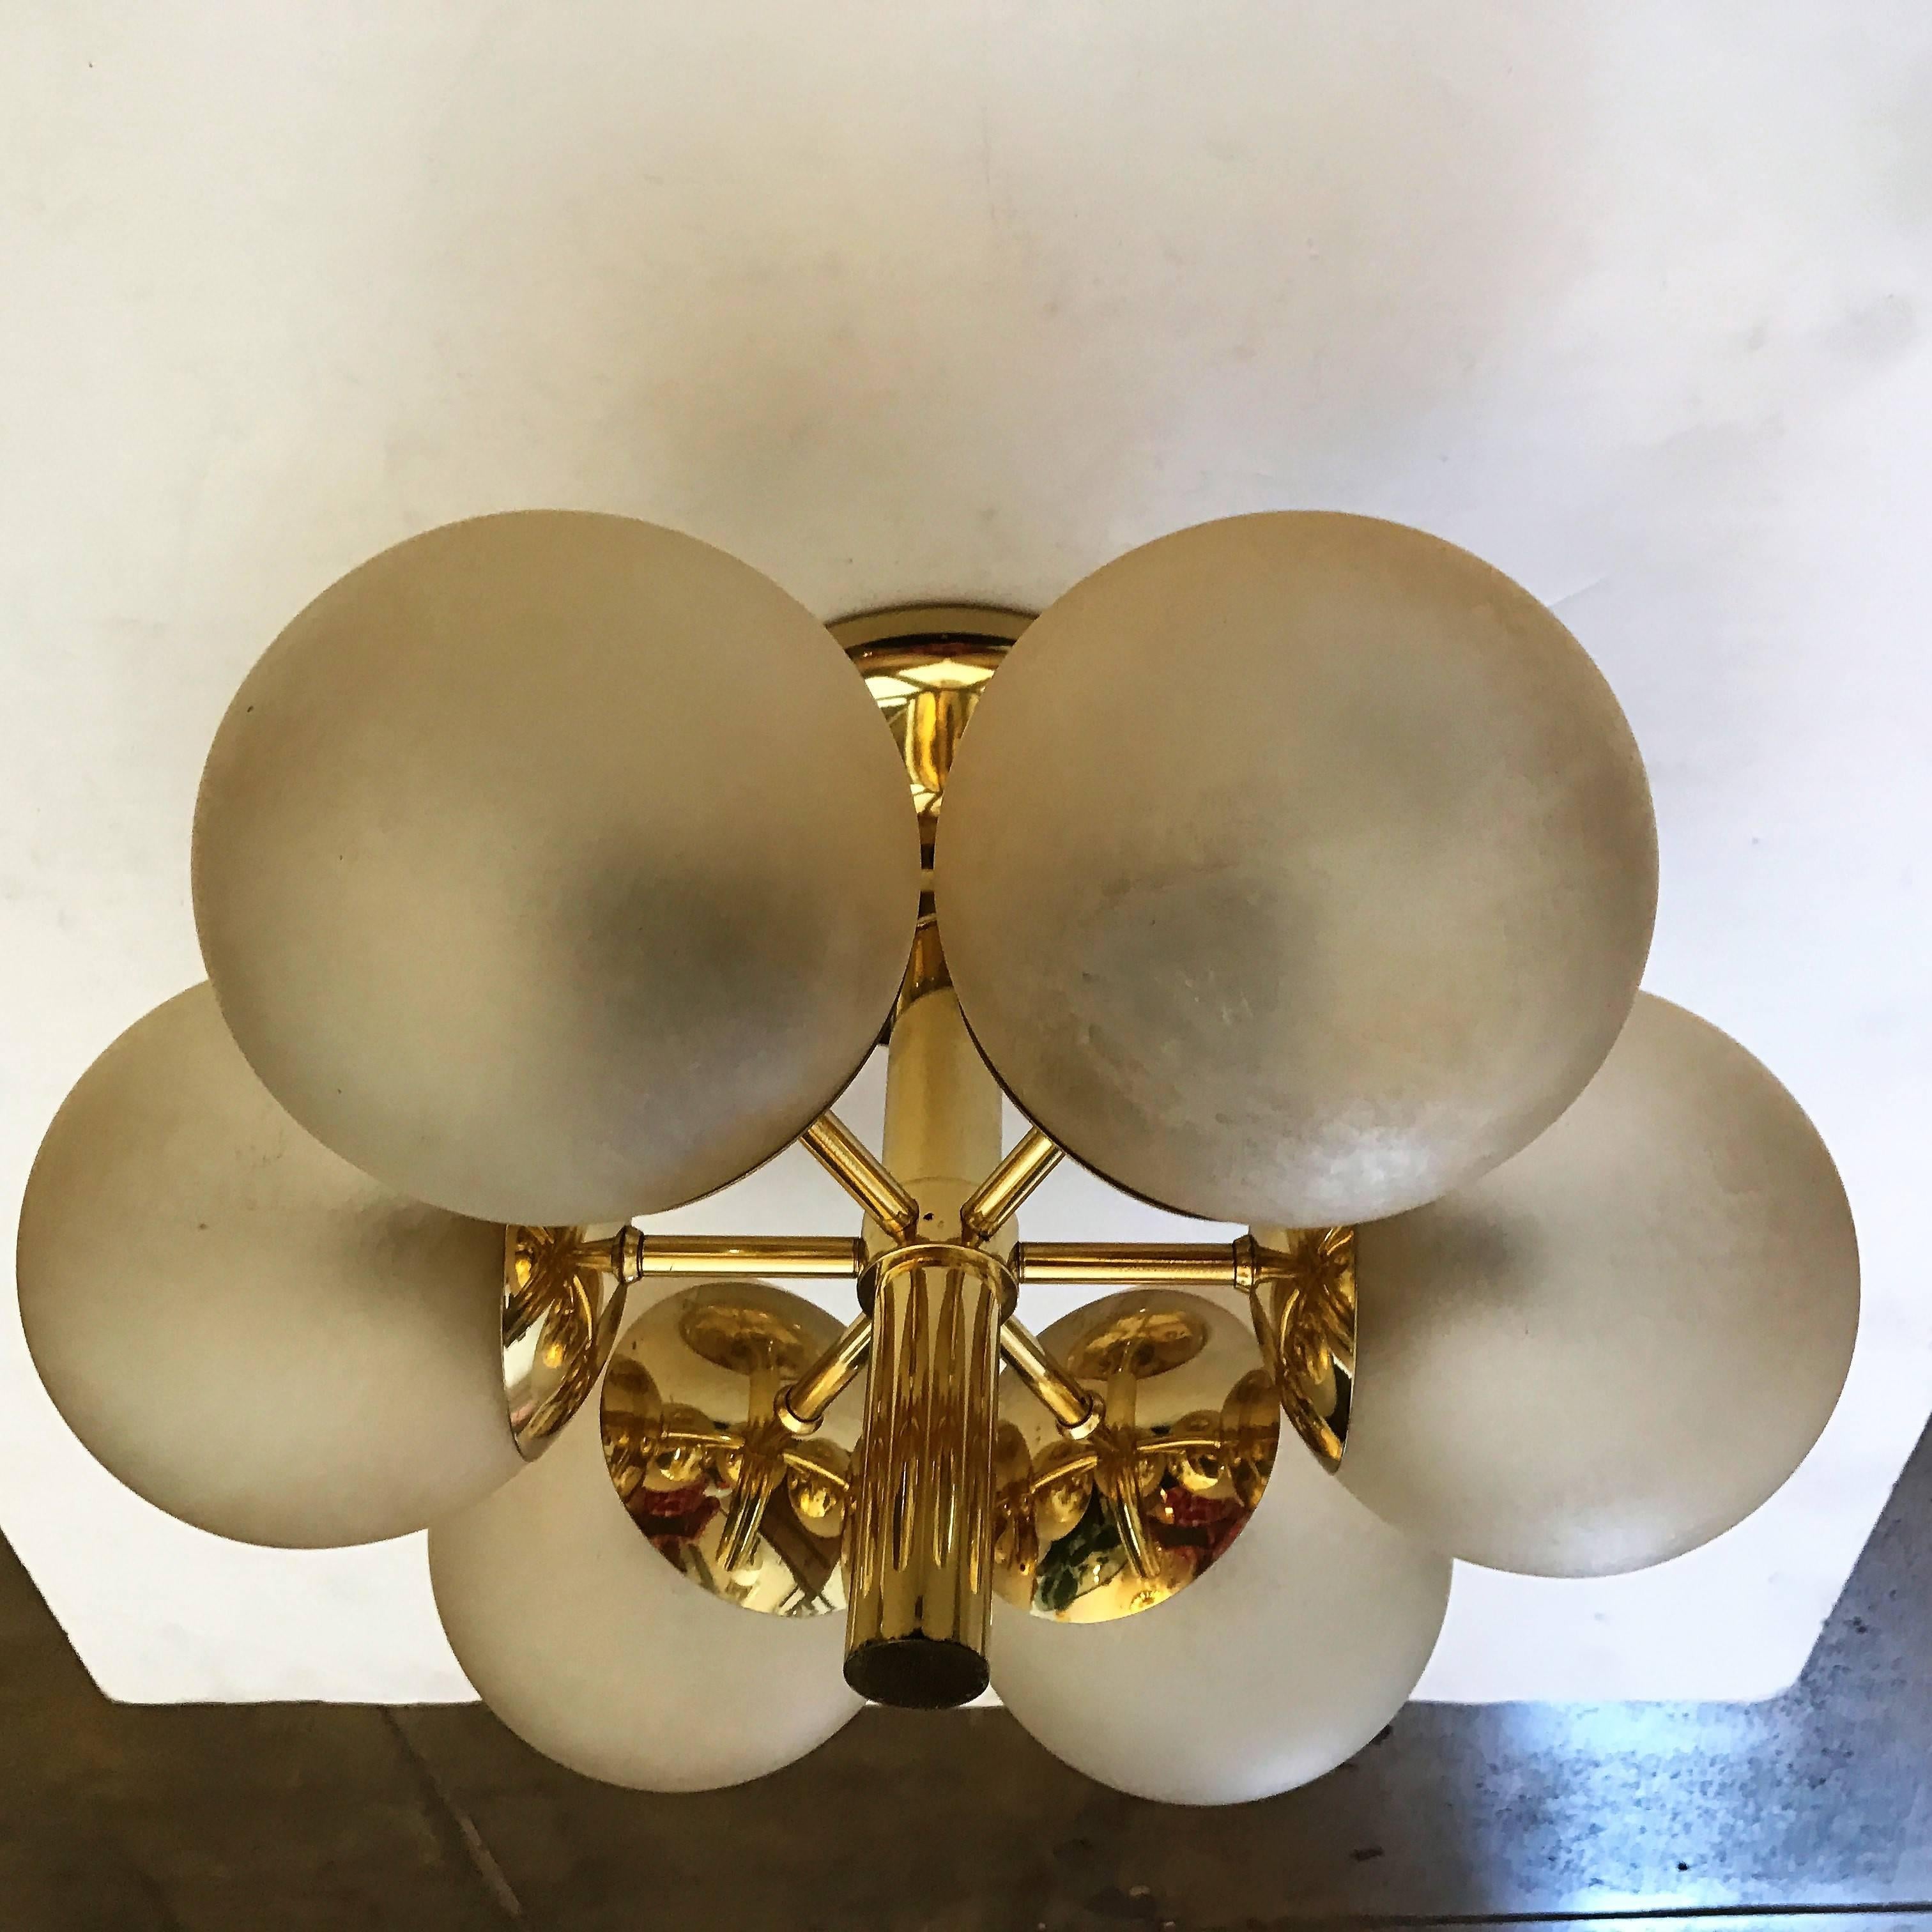 A beautiful 1970s German space age flush light or chandelier composed of a golden brass fixture with golden frosted glass globe shades by the lighting company, Kaiser. Six light sources. Newly Rewired.